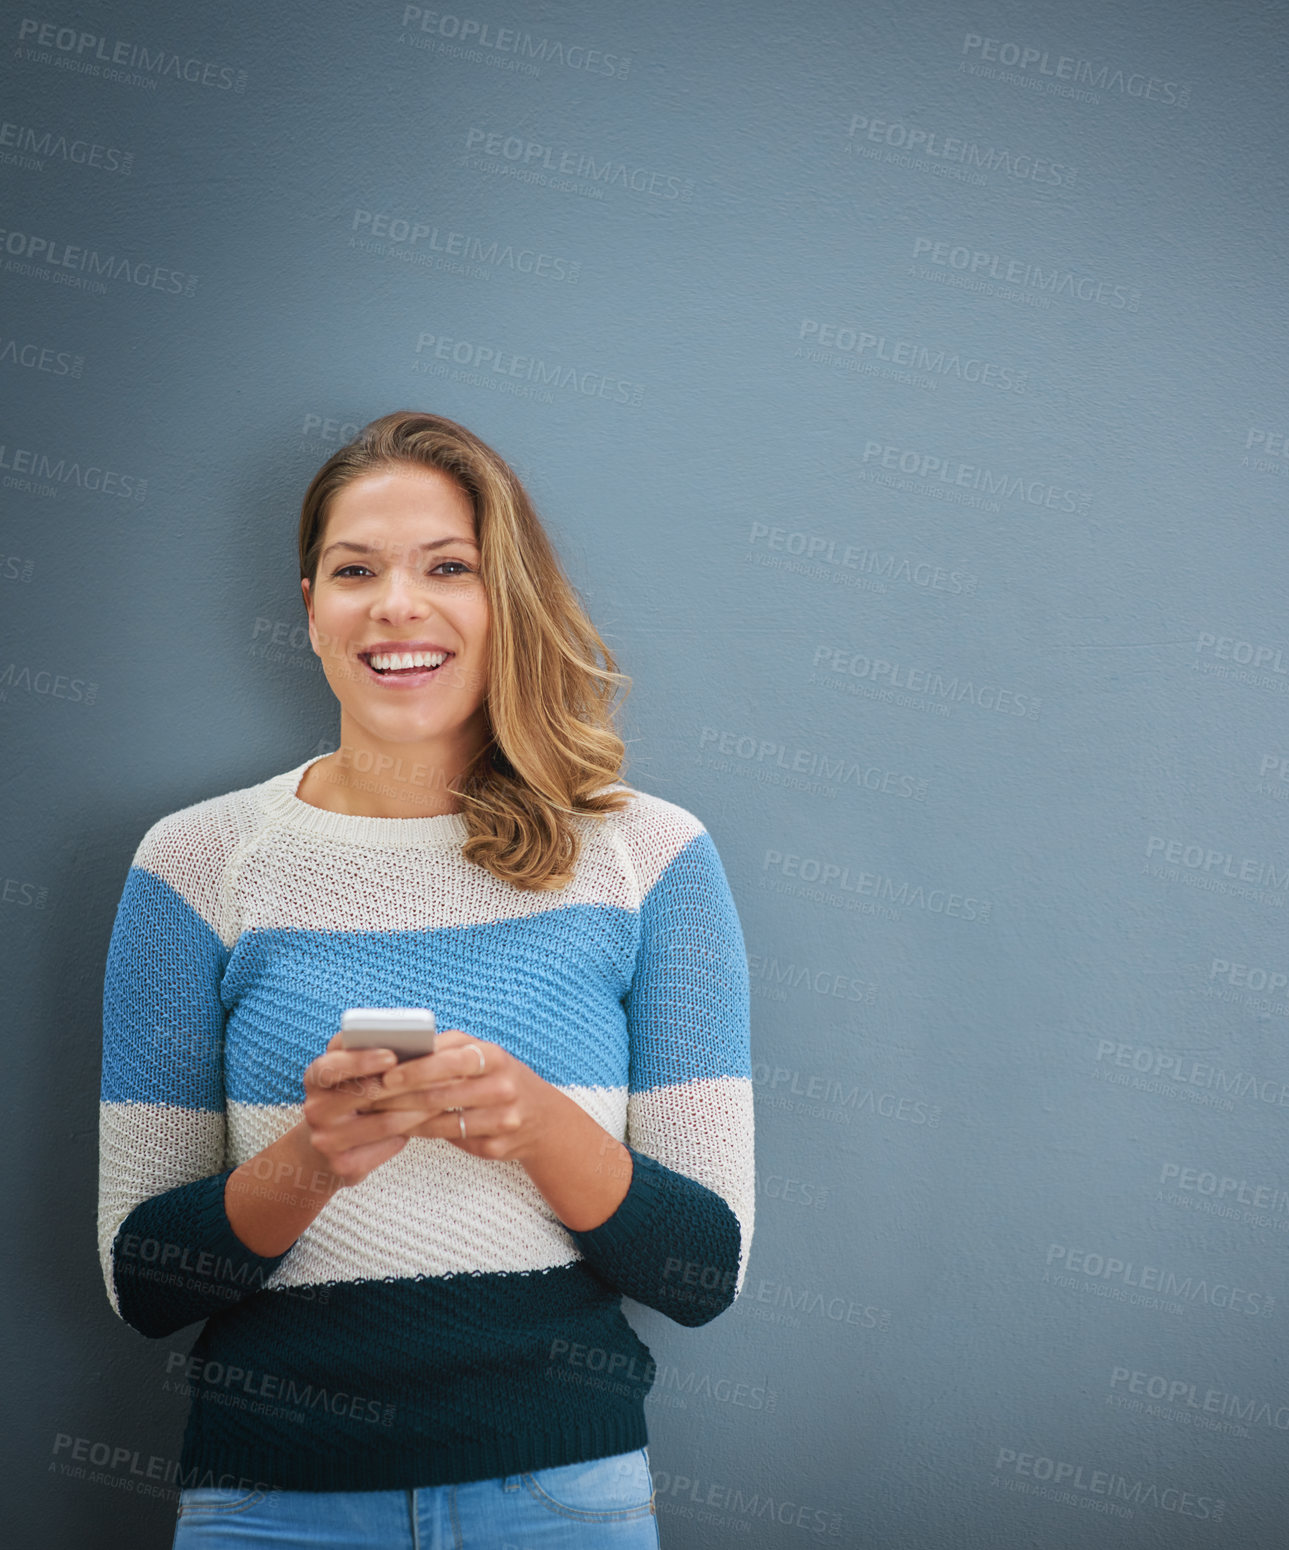 Buy stock photo Studio portrait of a young woman using a mobile phone against a gray background